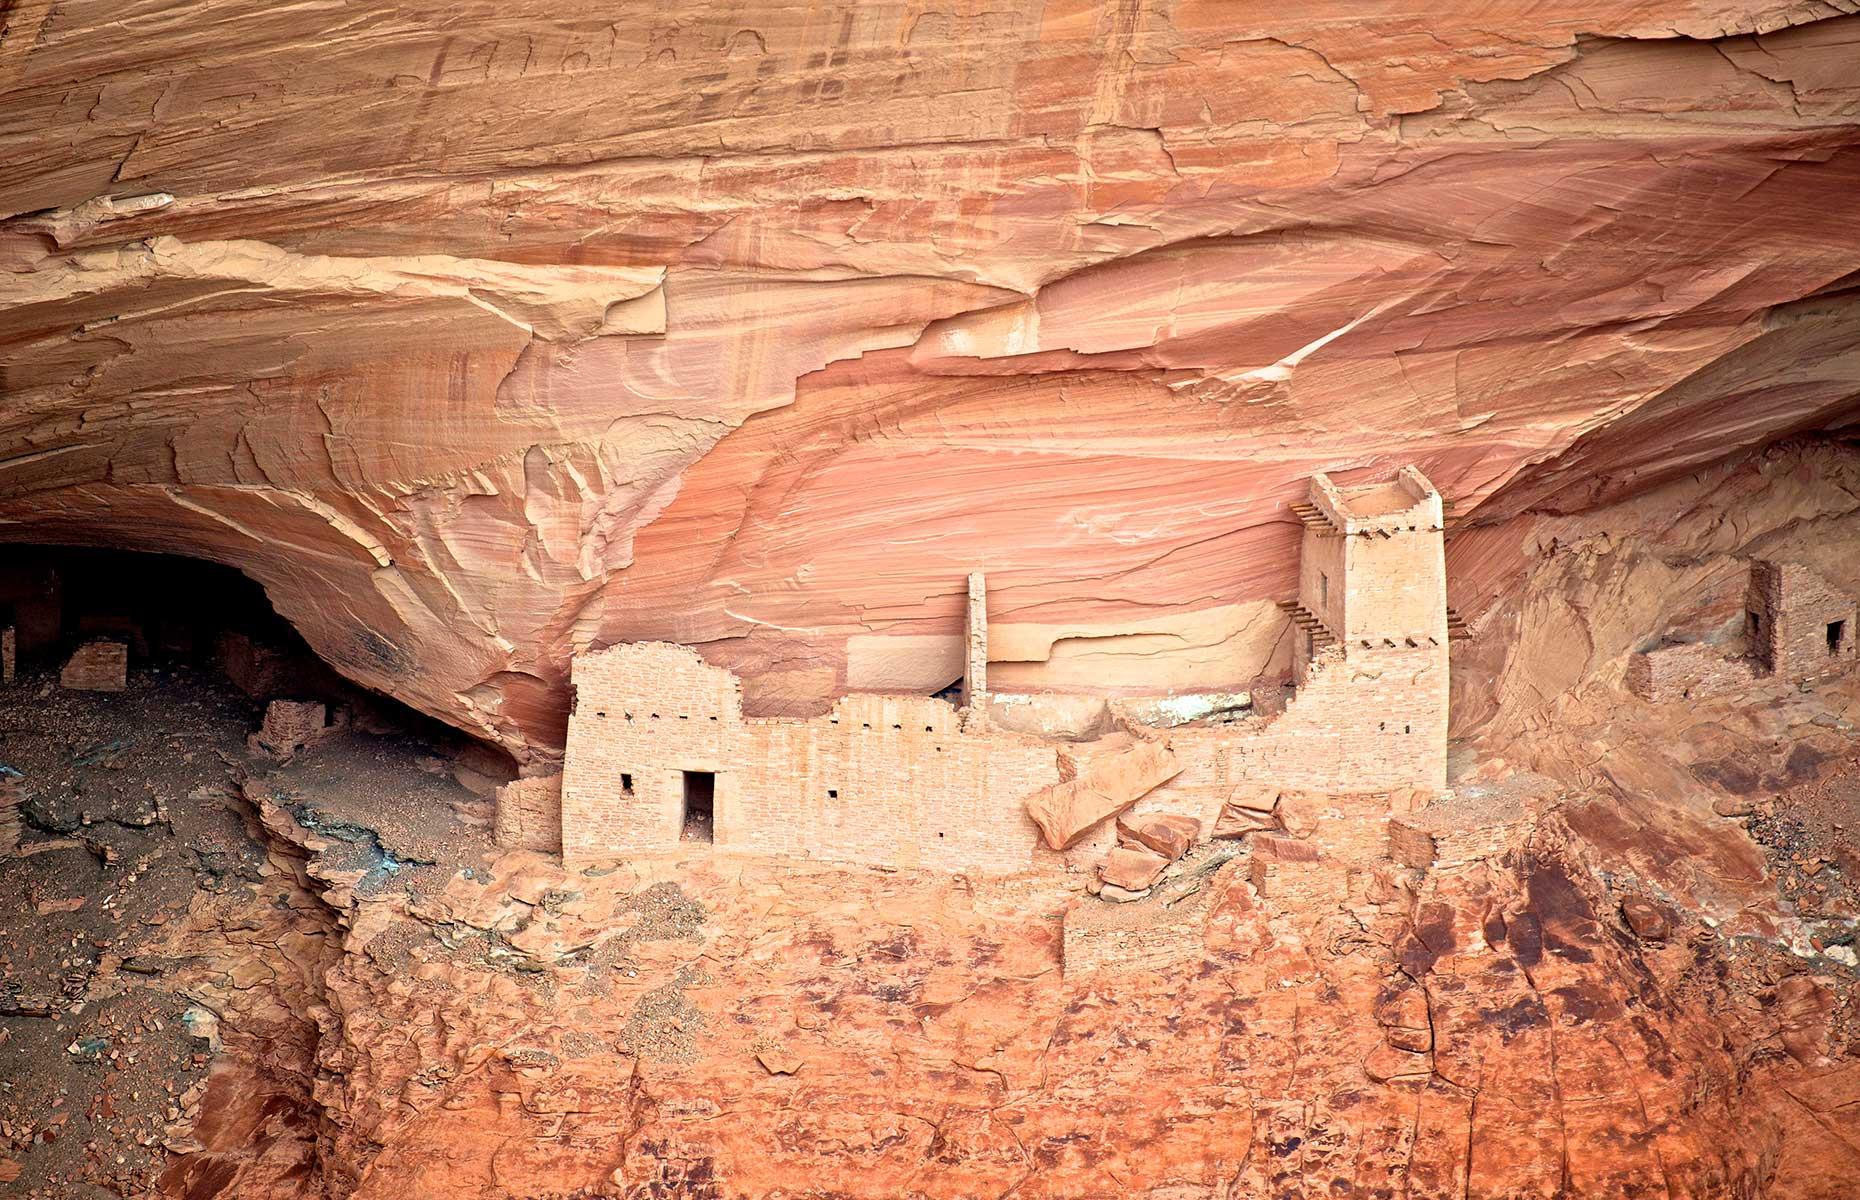 <p>Arizona is home to dozens of ancient dwellings, pueblos and ruins. One of the oldest we know of is the <a href="https://www.worldhistory.org/Canyon_de_Chelly/">Mummy Cave</a> in Canyon de Chelly (pictured). Ancient Puebloans built at least 70 rooms here, believed to date back to AD 300, which you can view from the Mummy Cave Overlook on the park's North Rim Drive. Otherwise, the Pueblo Grande Ruins near Phoenix, <a href="https://pueblogrande.org/museum-history/">built around AD 450</a> by the Hohokam people, are also worth seeing, and include a Mesoamerican-inspired ball court the Hohokam once played on. You can also visit the Pueblo Grande Museum and Archaeological Park to enjoy exhibits, a trail system and special events and programs throughout the year.</p>